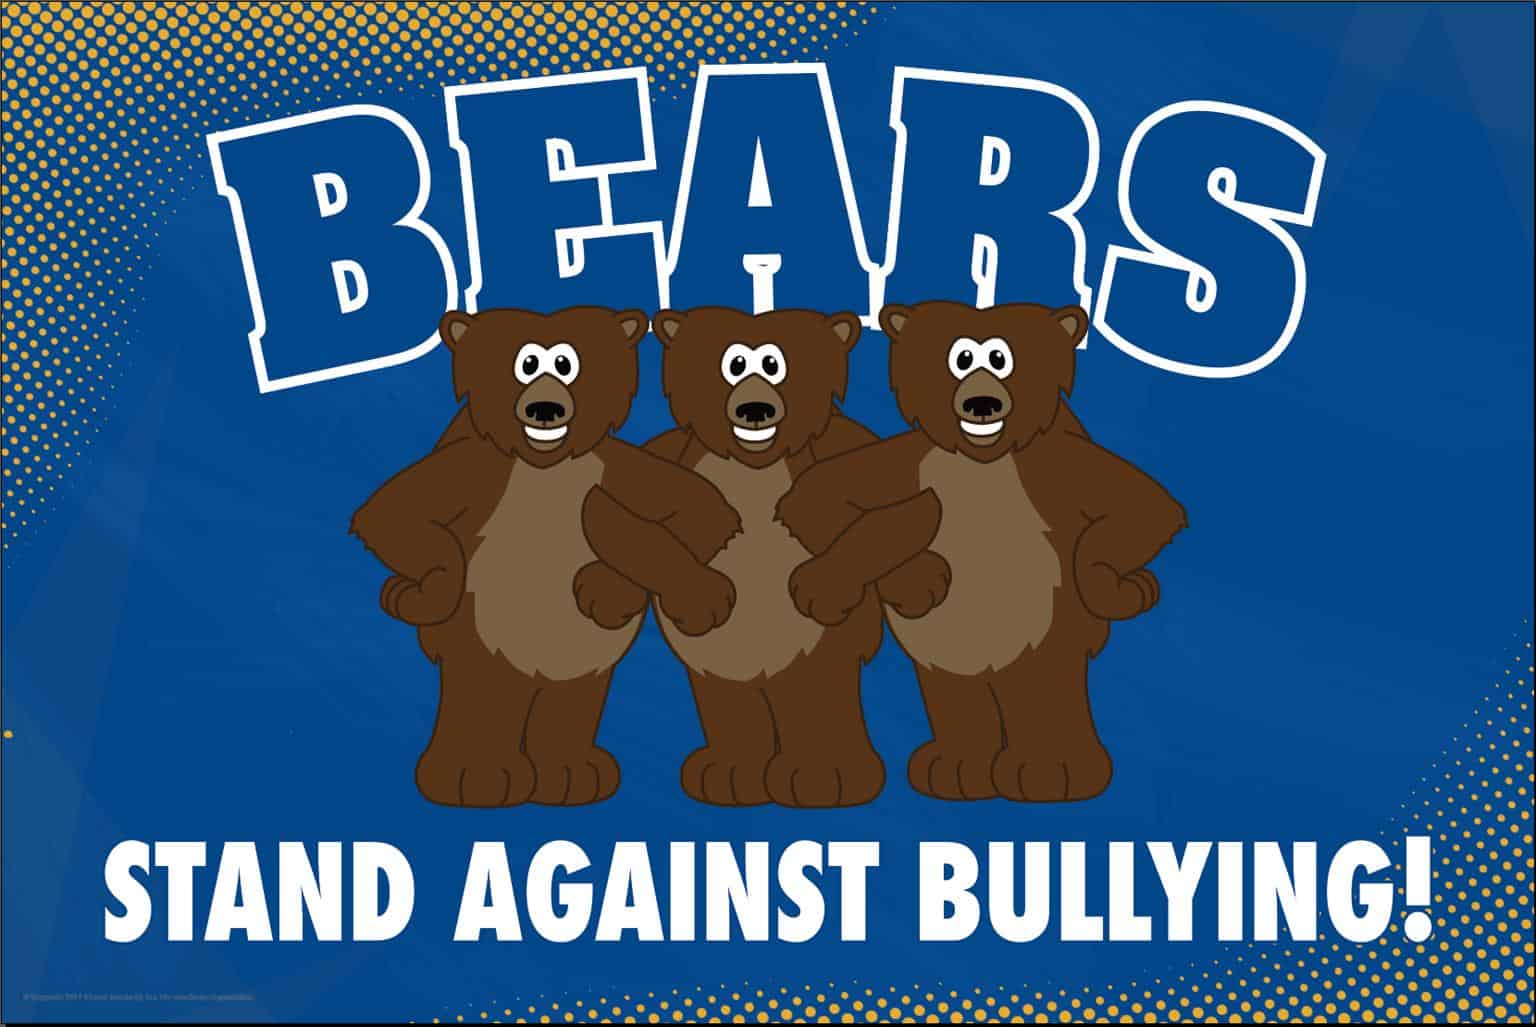 Anti Bullying Poster Bears (Grizzly)